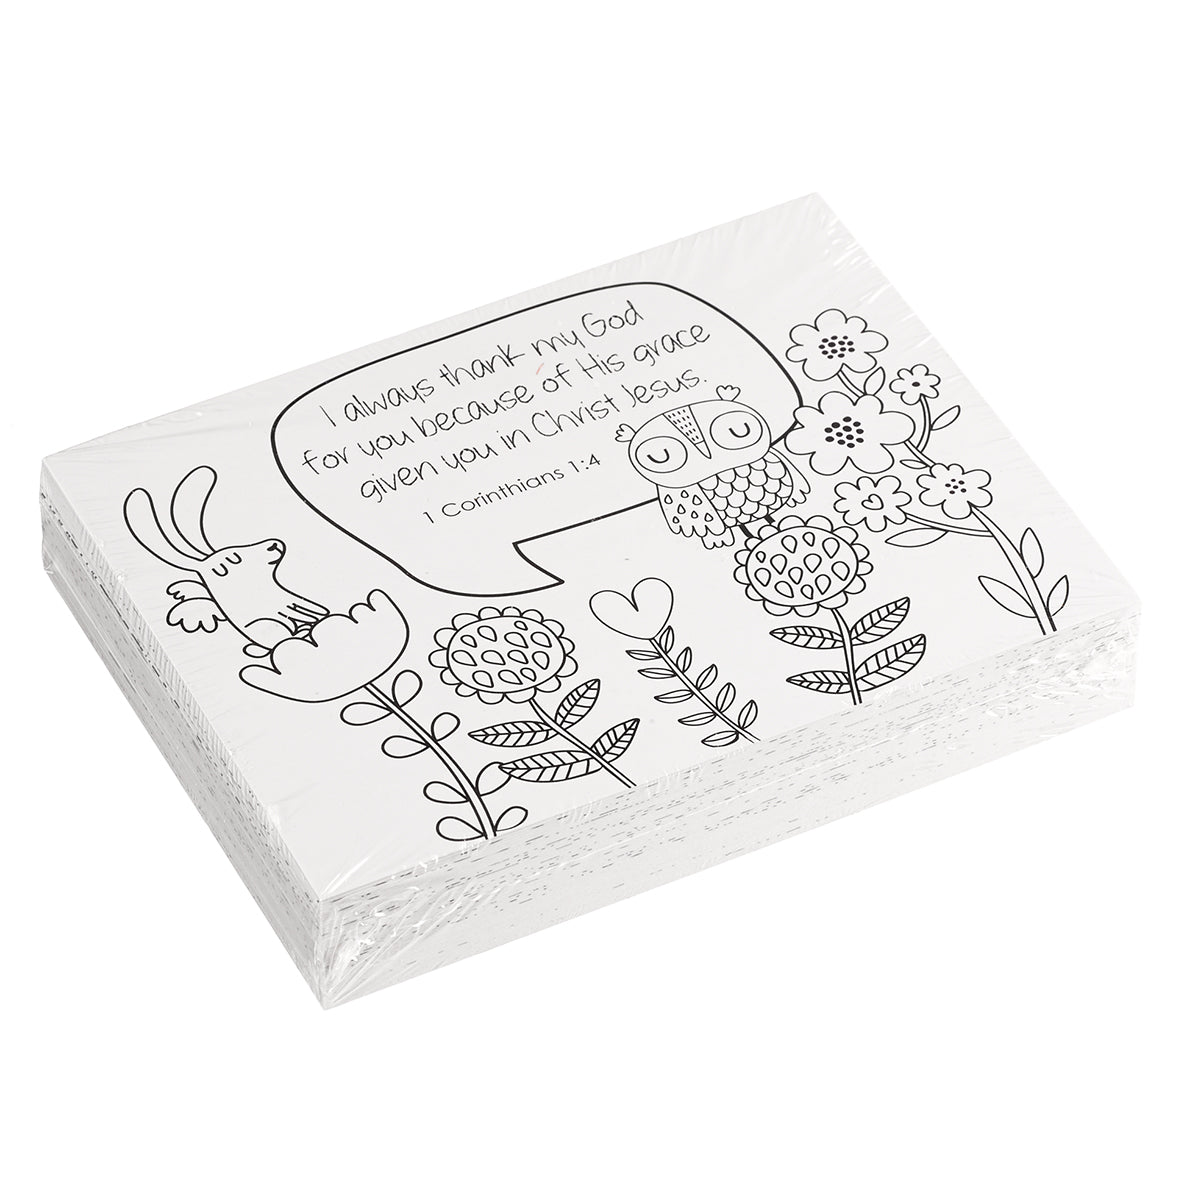 Creative Expressions Colouring Cards - The Christian Gift Company